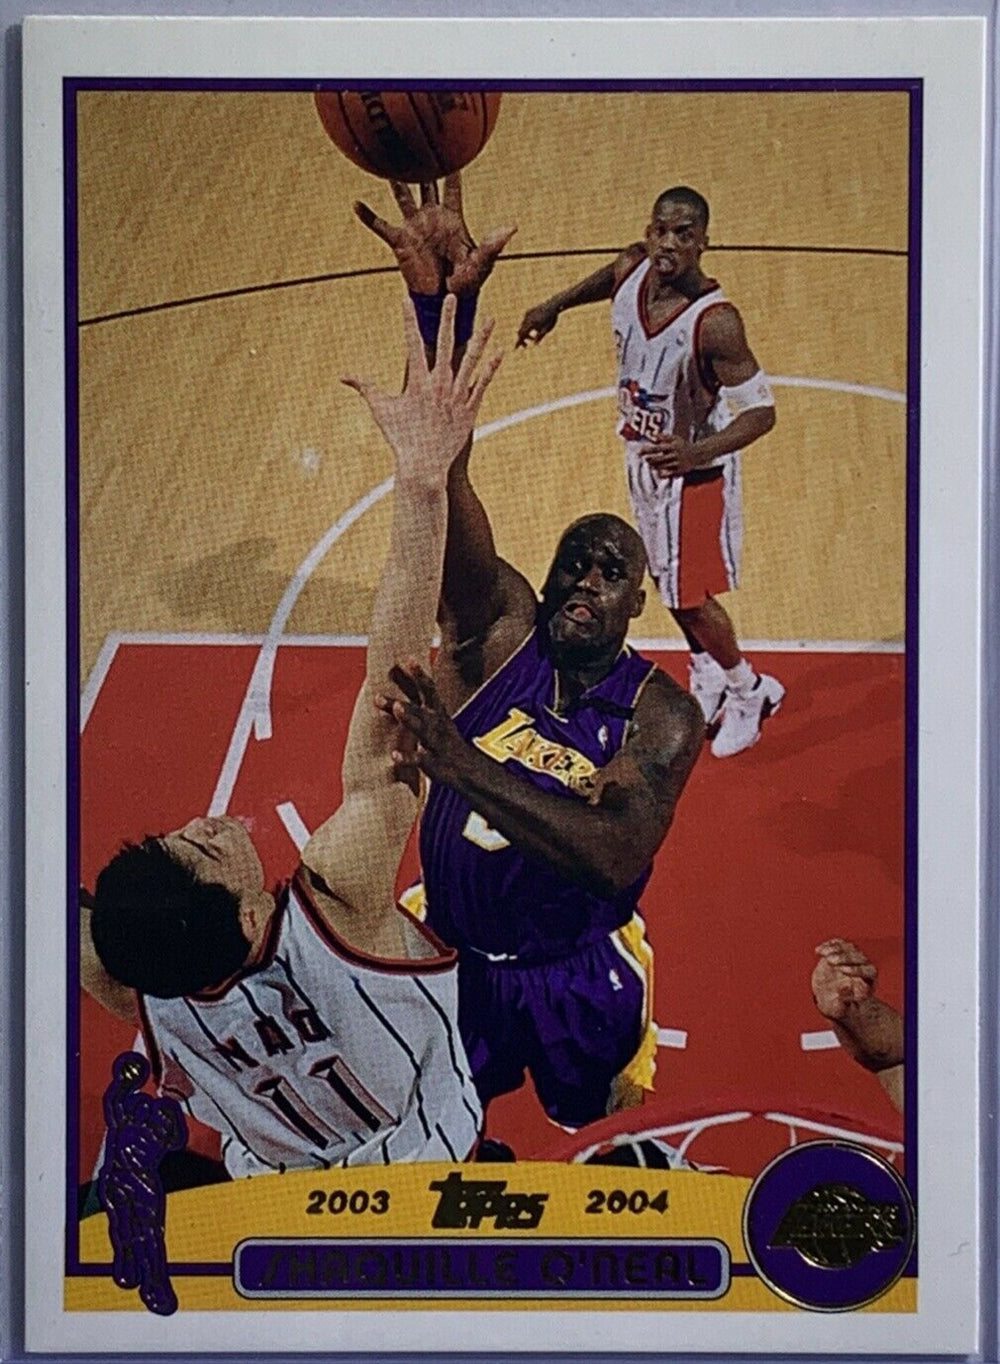 Shaquille O'Neal 2003 2004 Topps Collection GOLD FOIL Series Mint Card #34